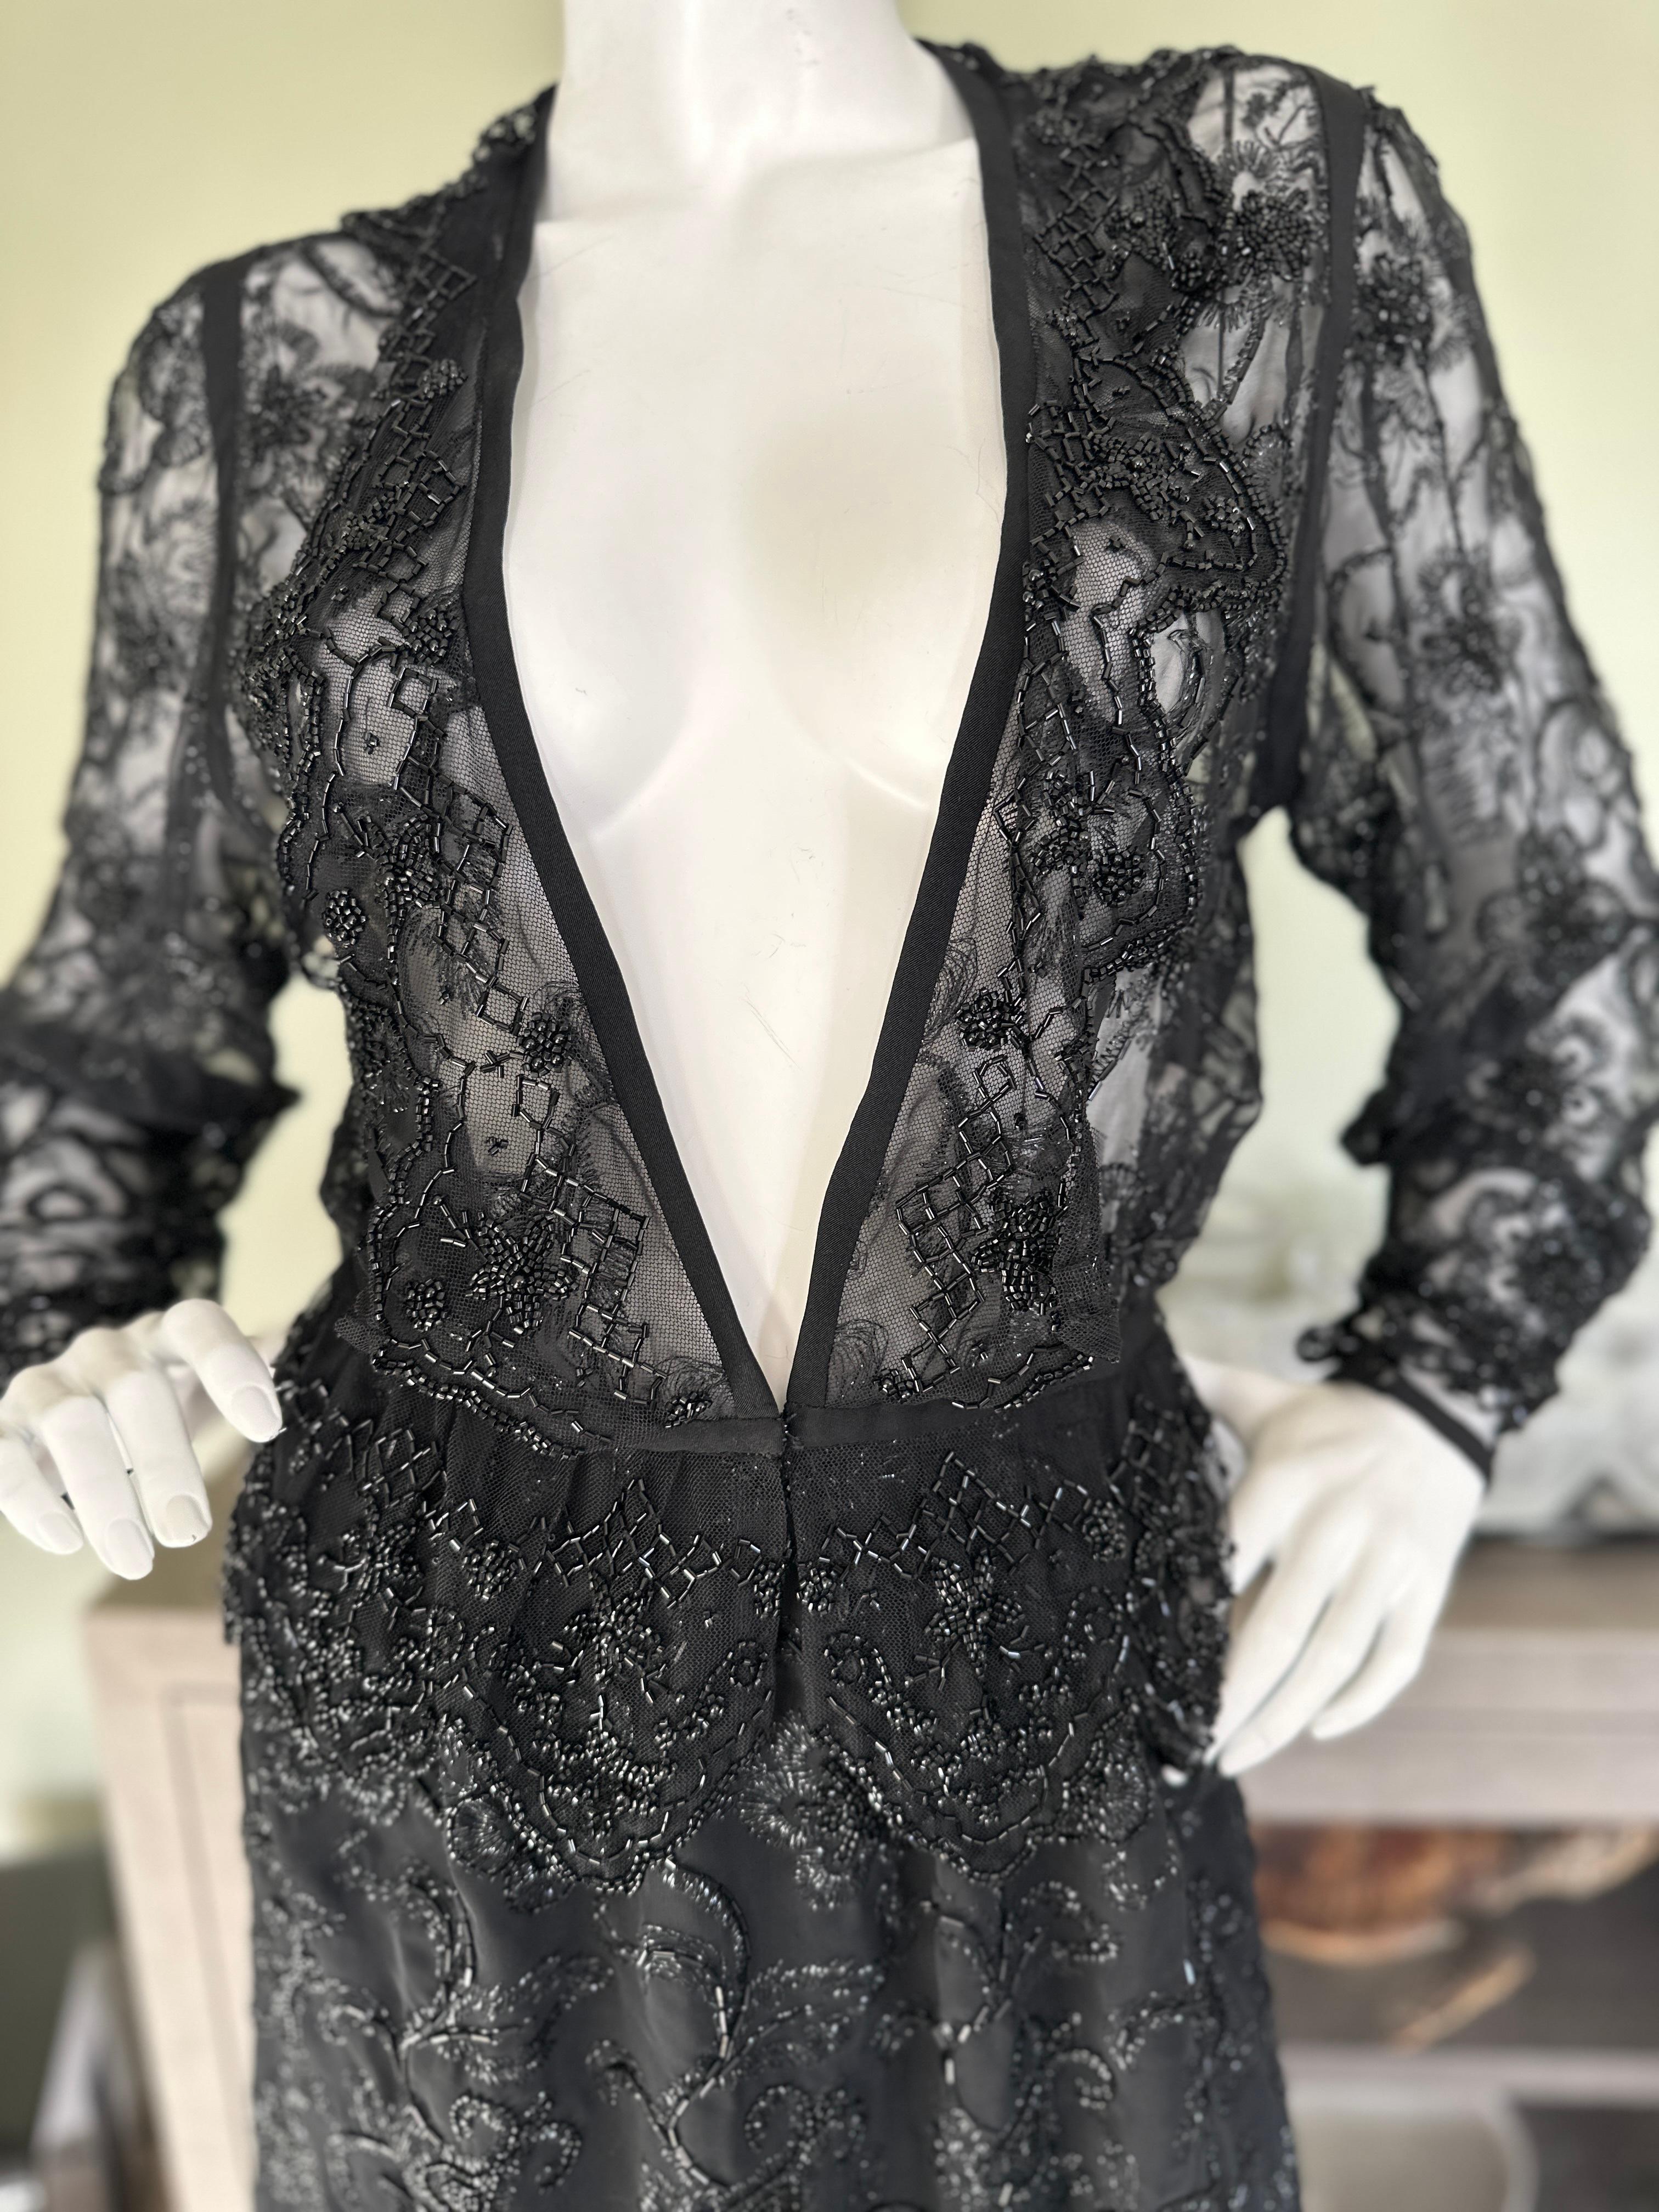 Giorgio Sant Angelo 1970's Disco Era Beaded Sheer Black 2 Pc Evening Dress.
This is incredible, please use the zoom feature to see details
The measurements are;
Bust   36